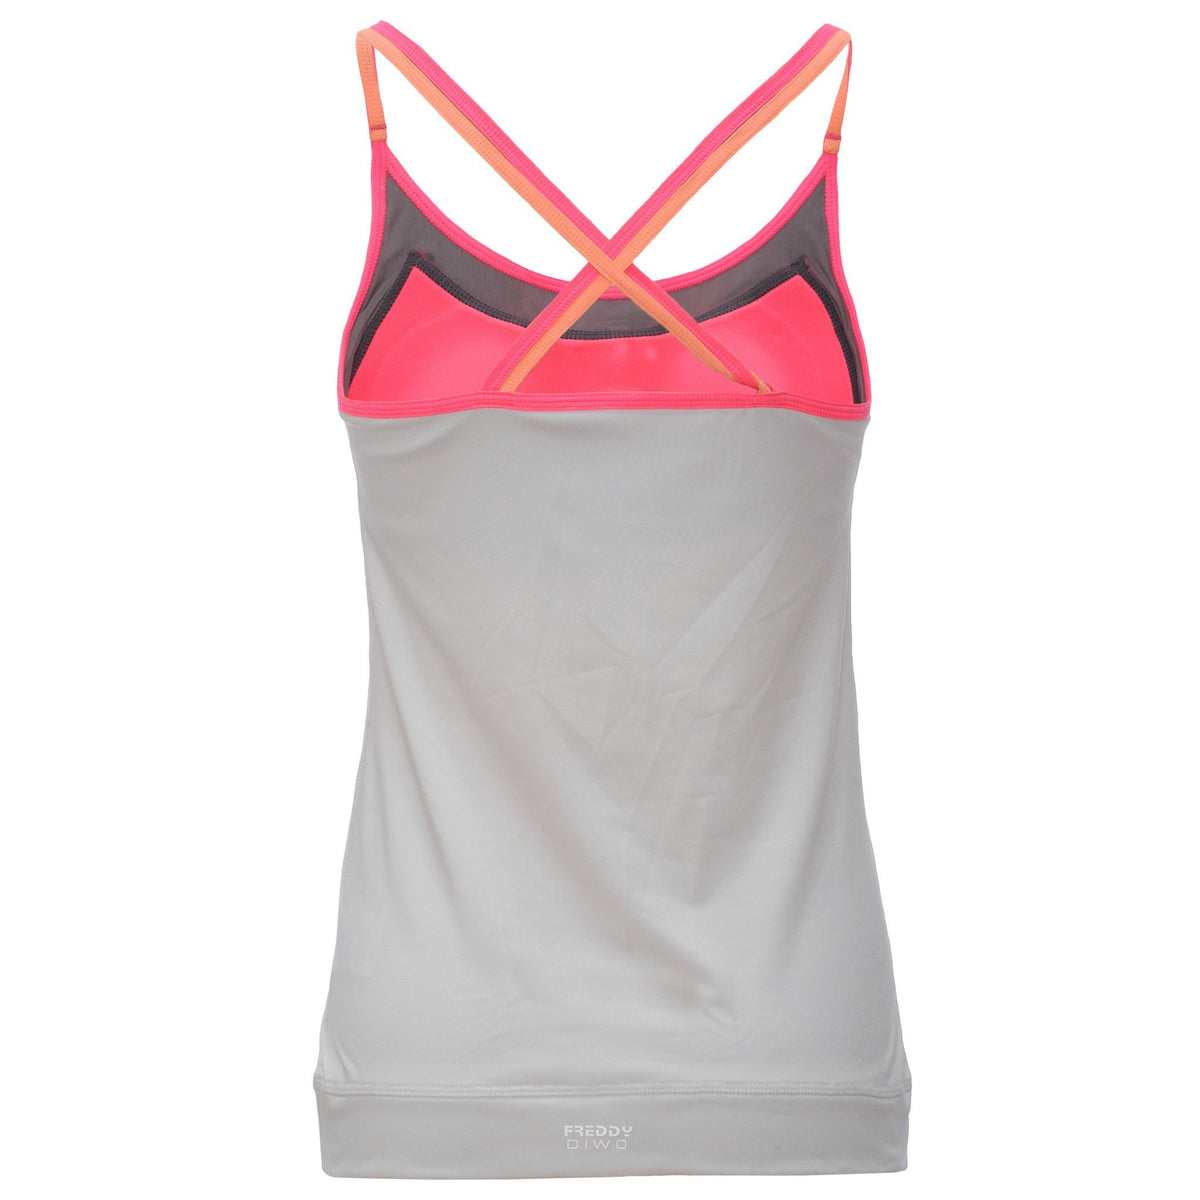 WHITE TANK TOP IN LIGHT D.I.W.O.® WITH PINK CROSSED STRAPS